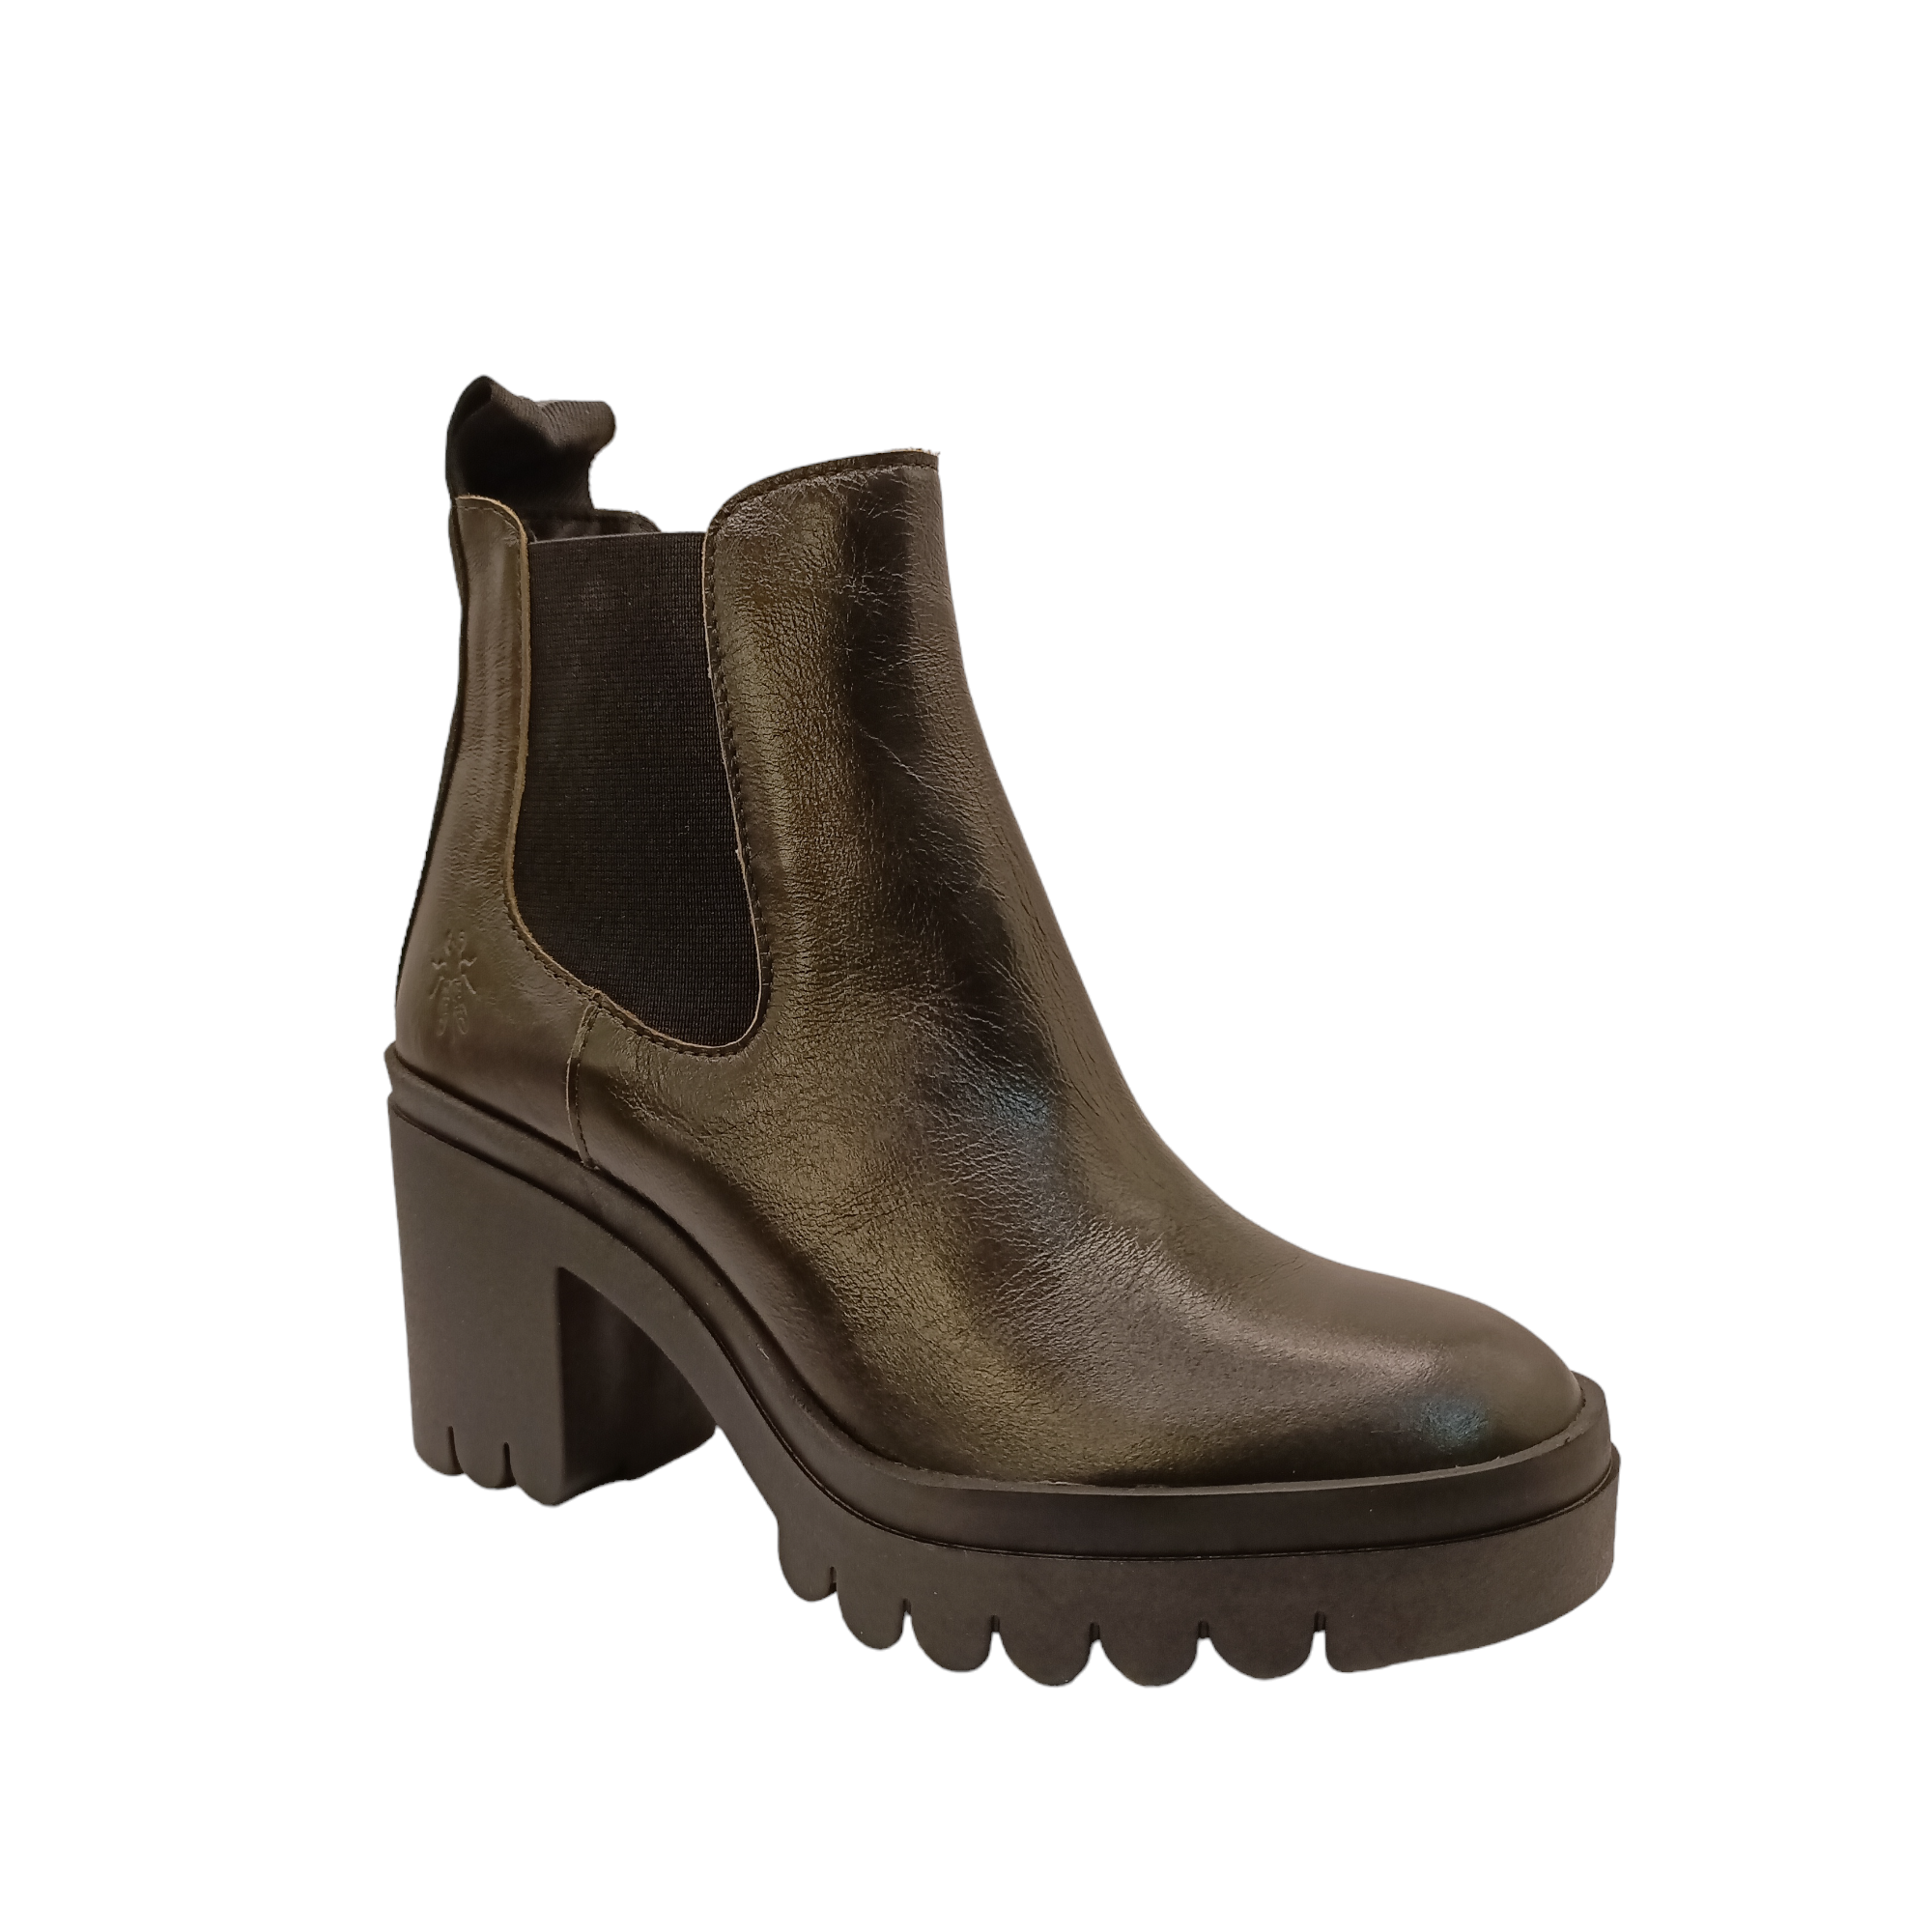 Shop Tope Fly London - with shoe&amp;me - from Fly London - General - Boot, Winter, Womens - [collection]